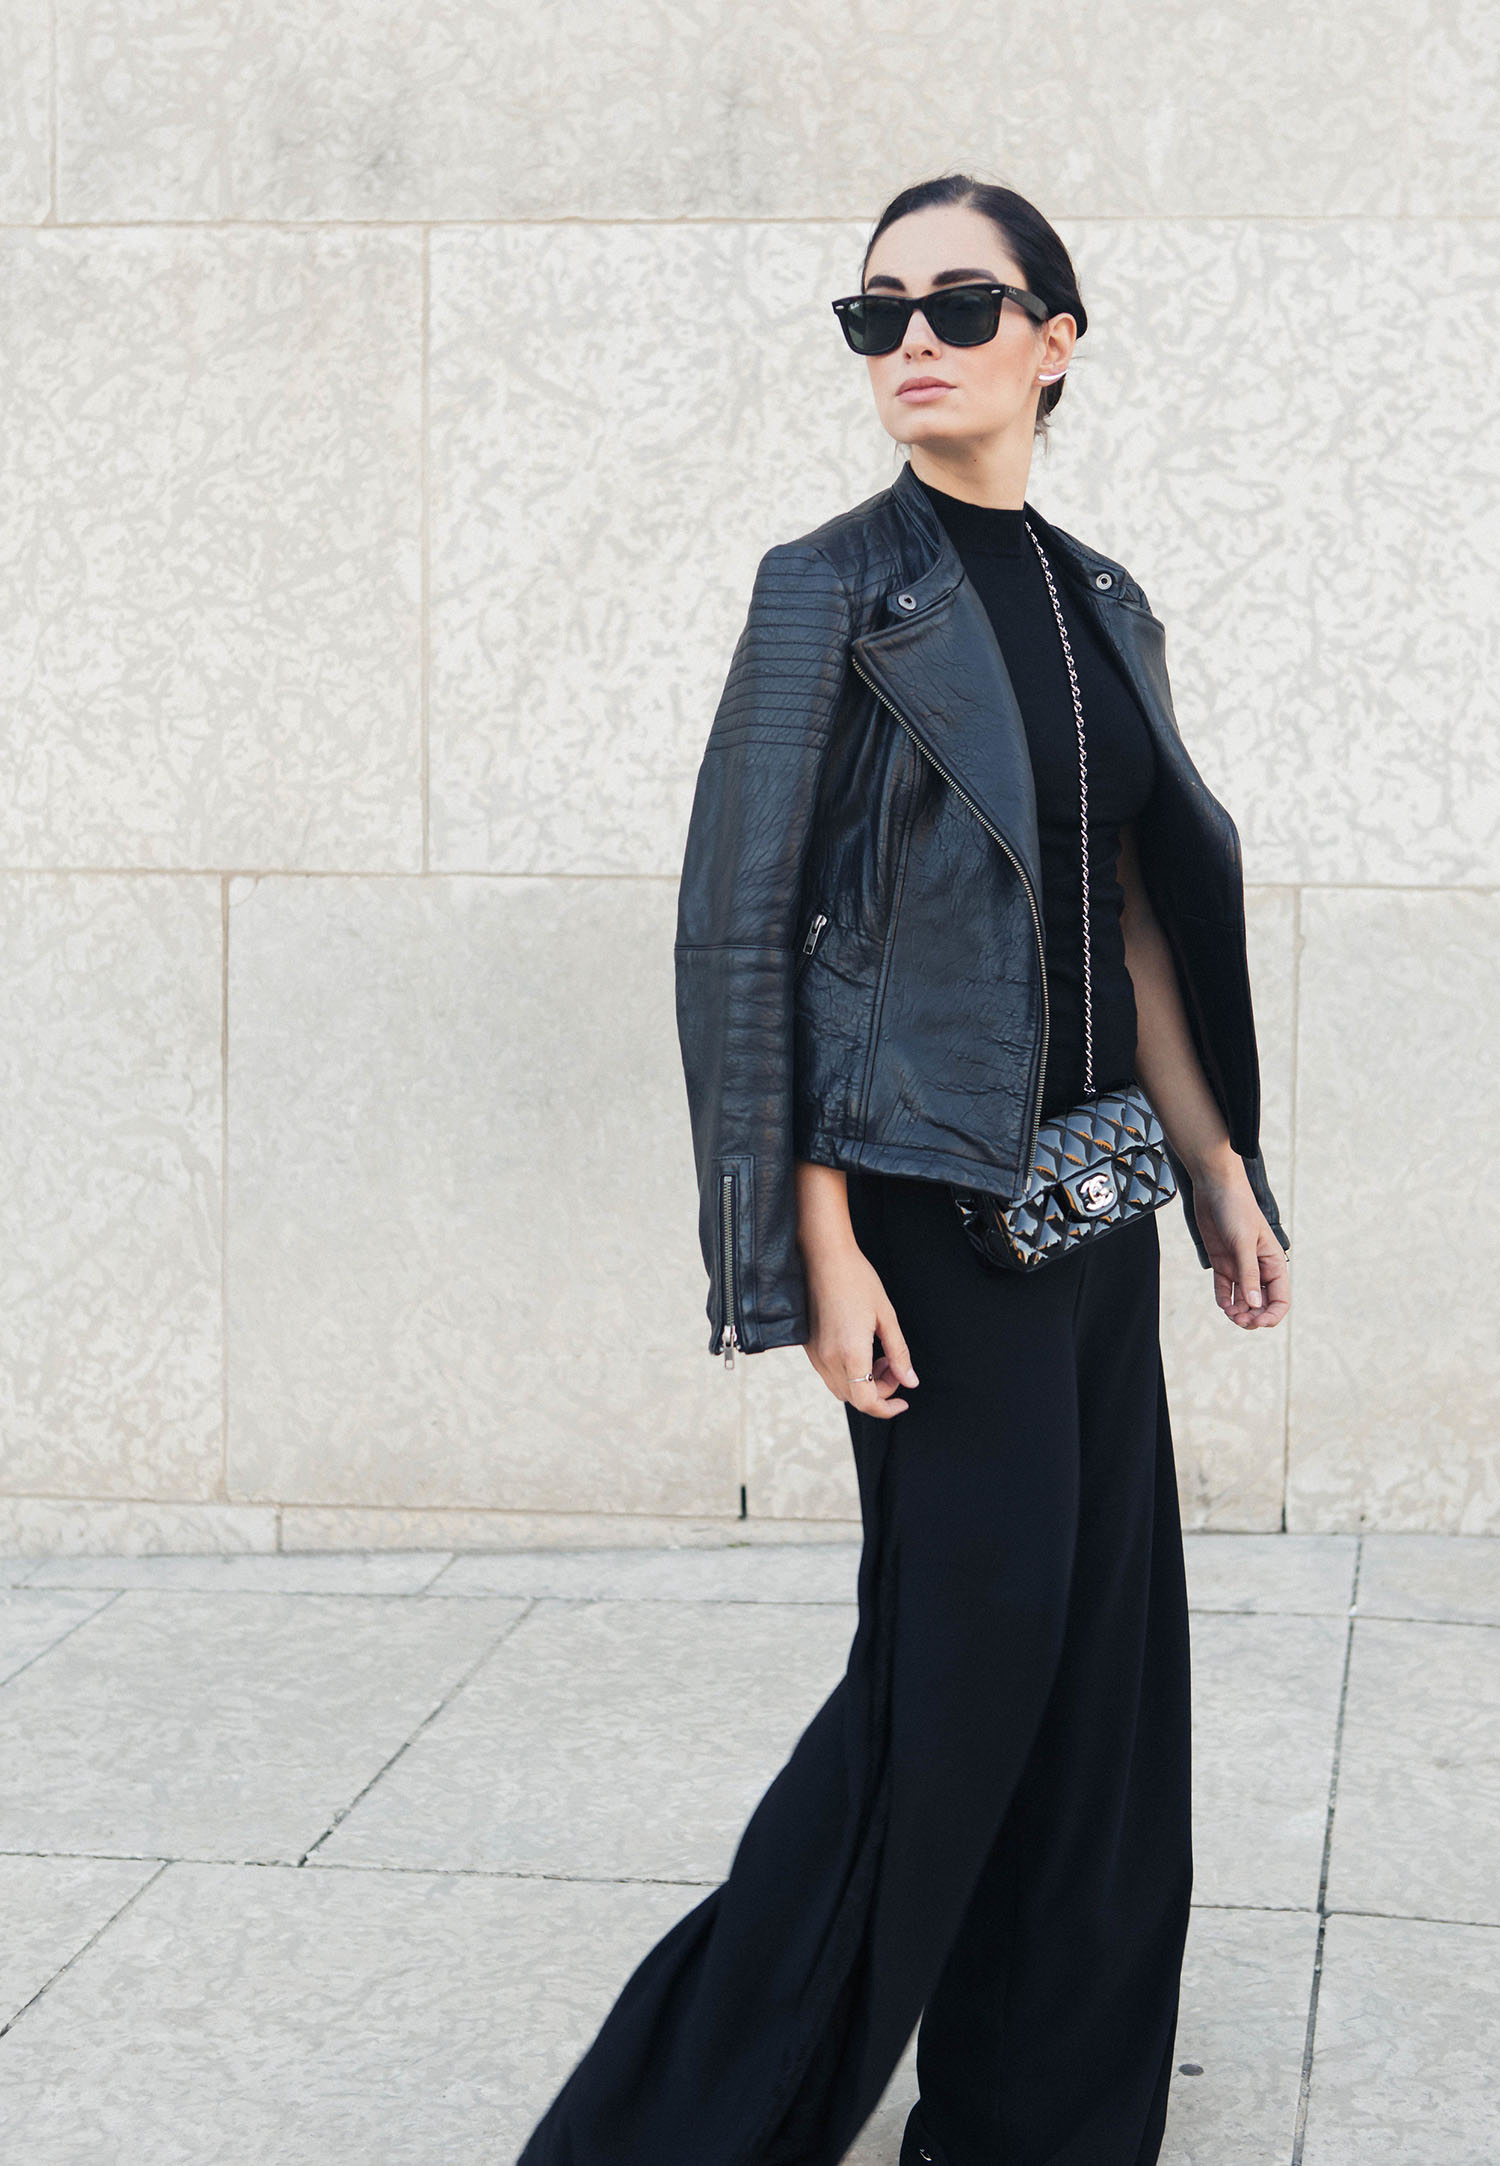 Fashion blogger Cee Fardoe of Coco & Vera wears all black at the Winnipeg Art Gallery, including RayBan Wayfarer sunglasses and a Le Chateau sweater, captured by Christa Wong Photography